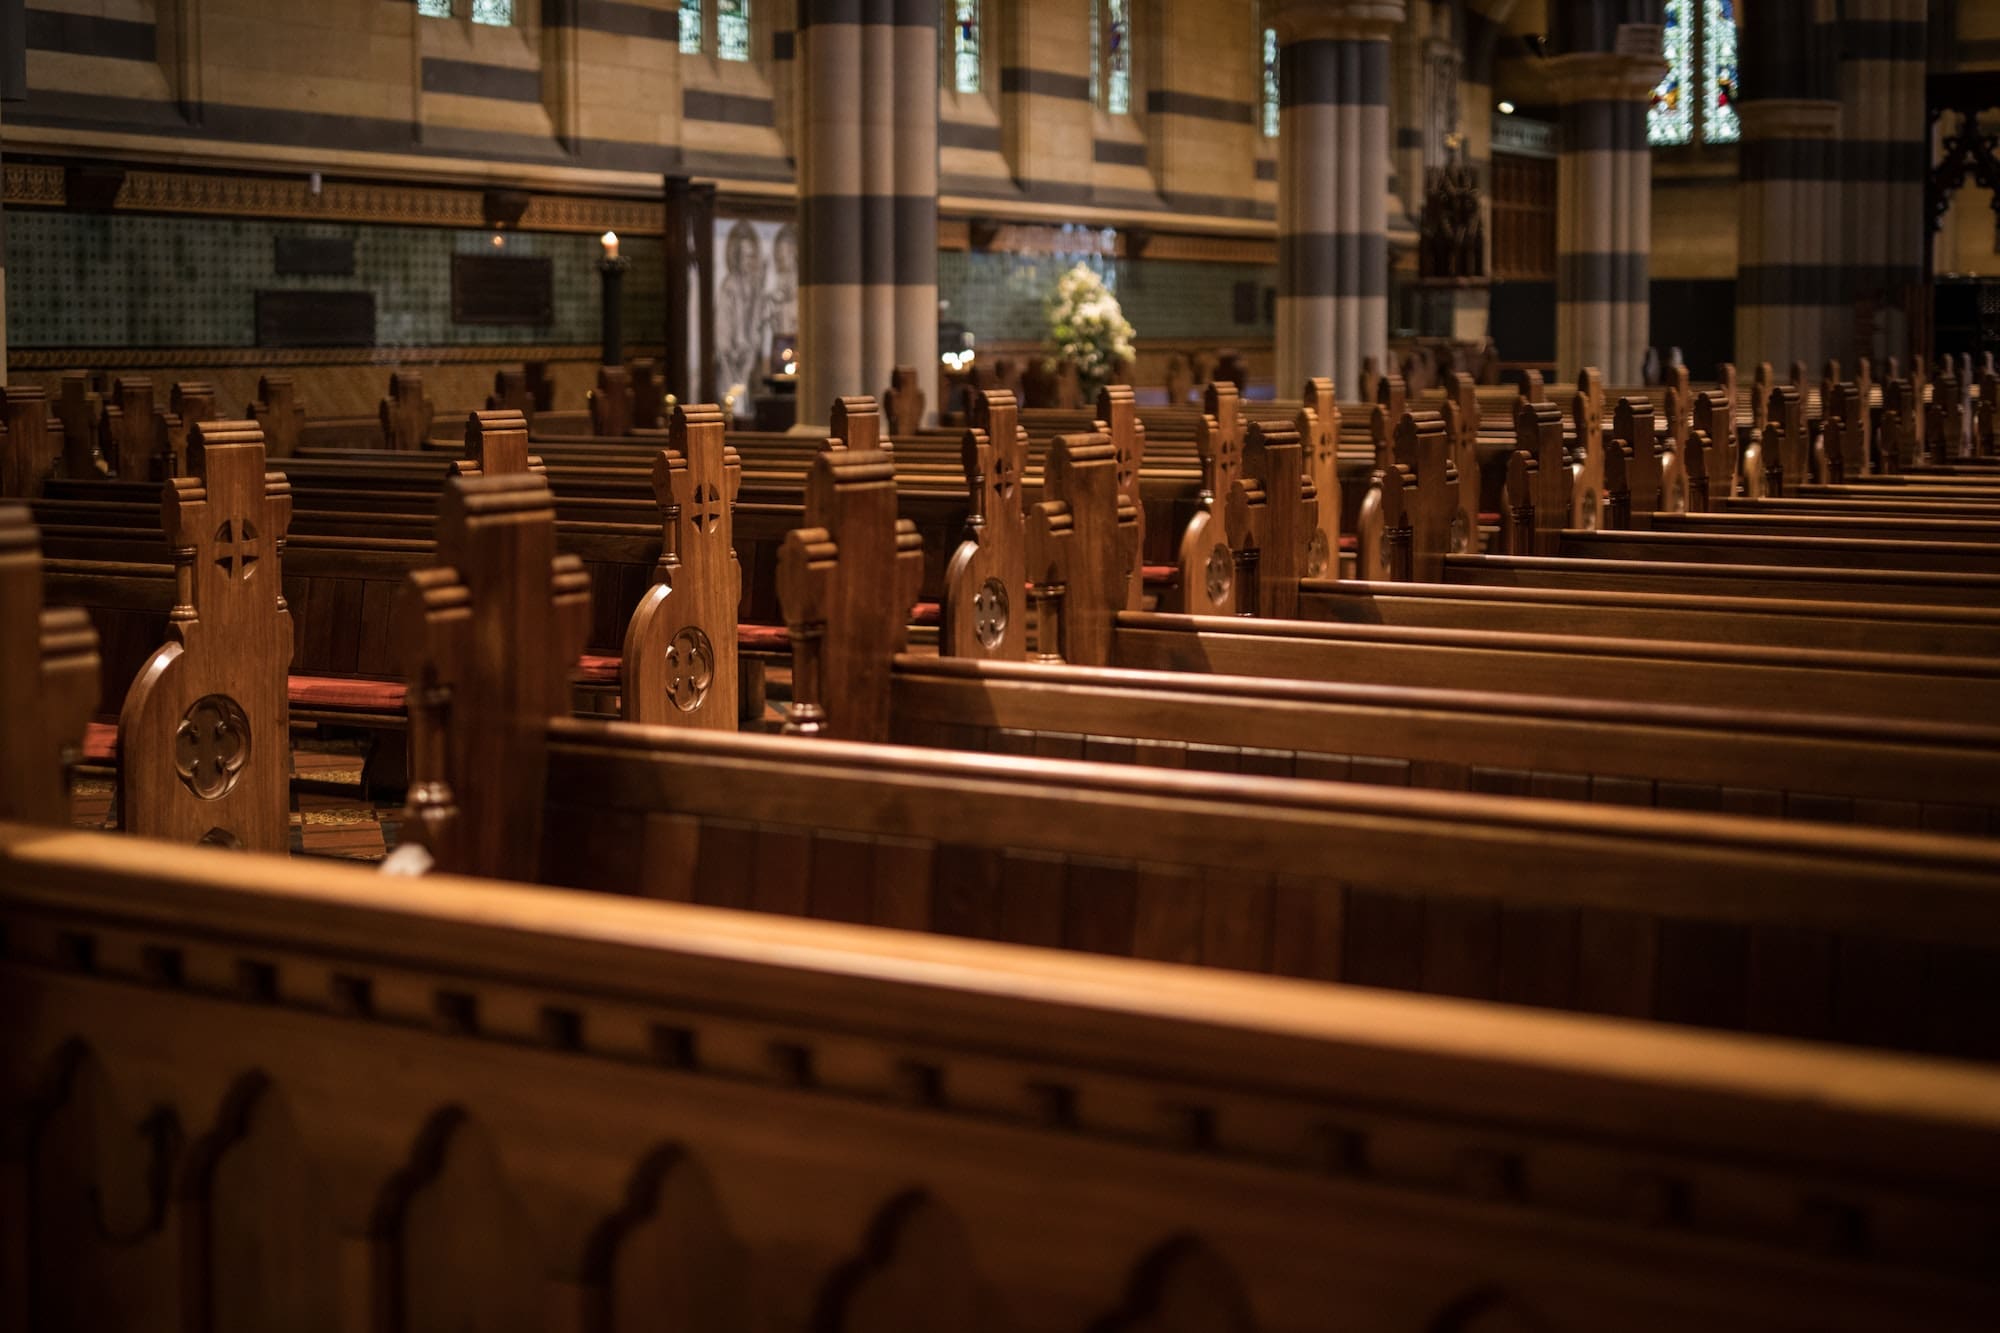 Empty church pews symbolizing the aftermath of the clergy sexual abuse scandal in Illinois